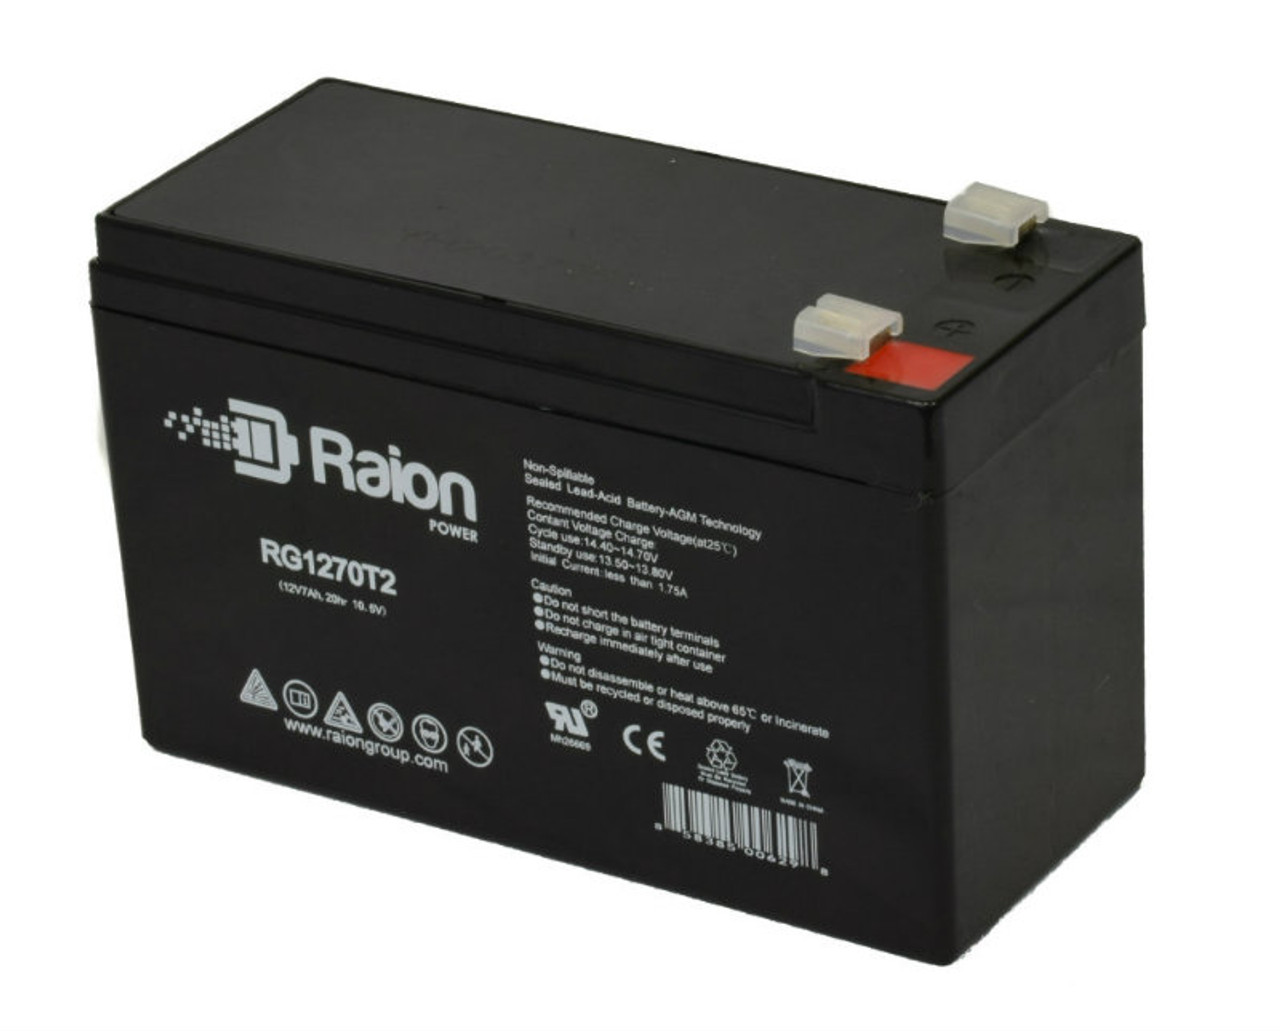 Raion Power Replacement 12V 7Ah Battery for Medical Data E270037SC7 - 1 Pack